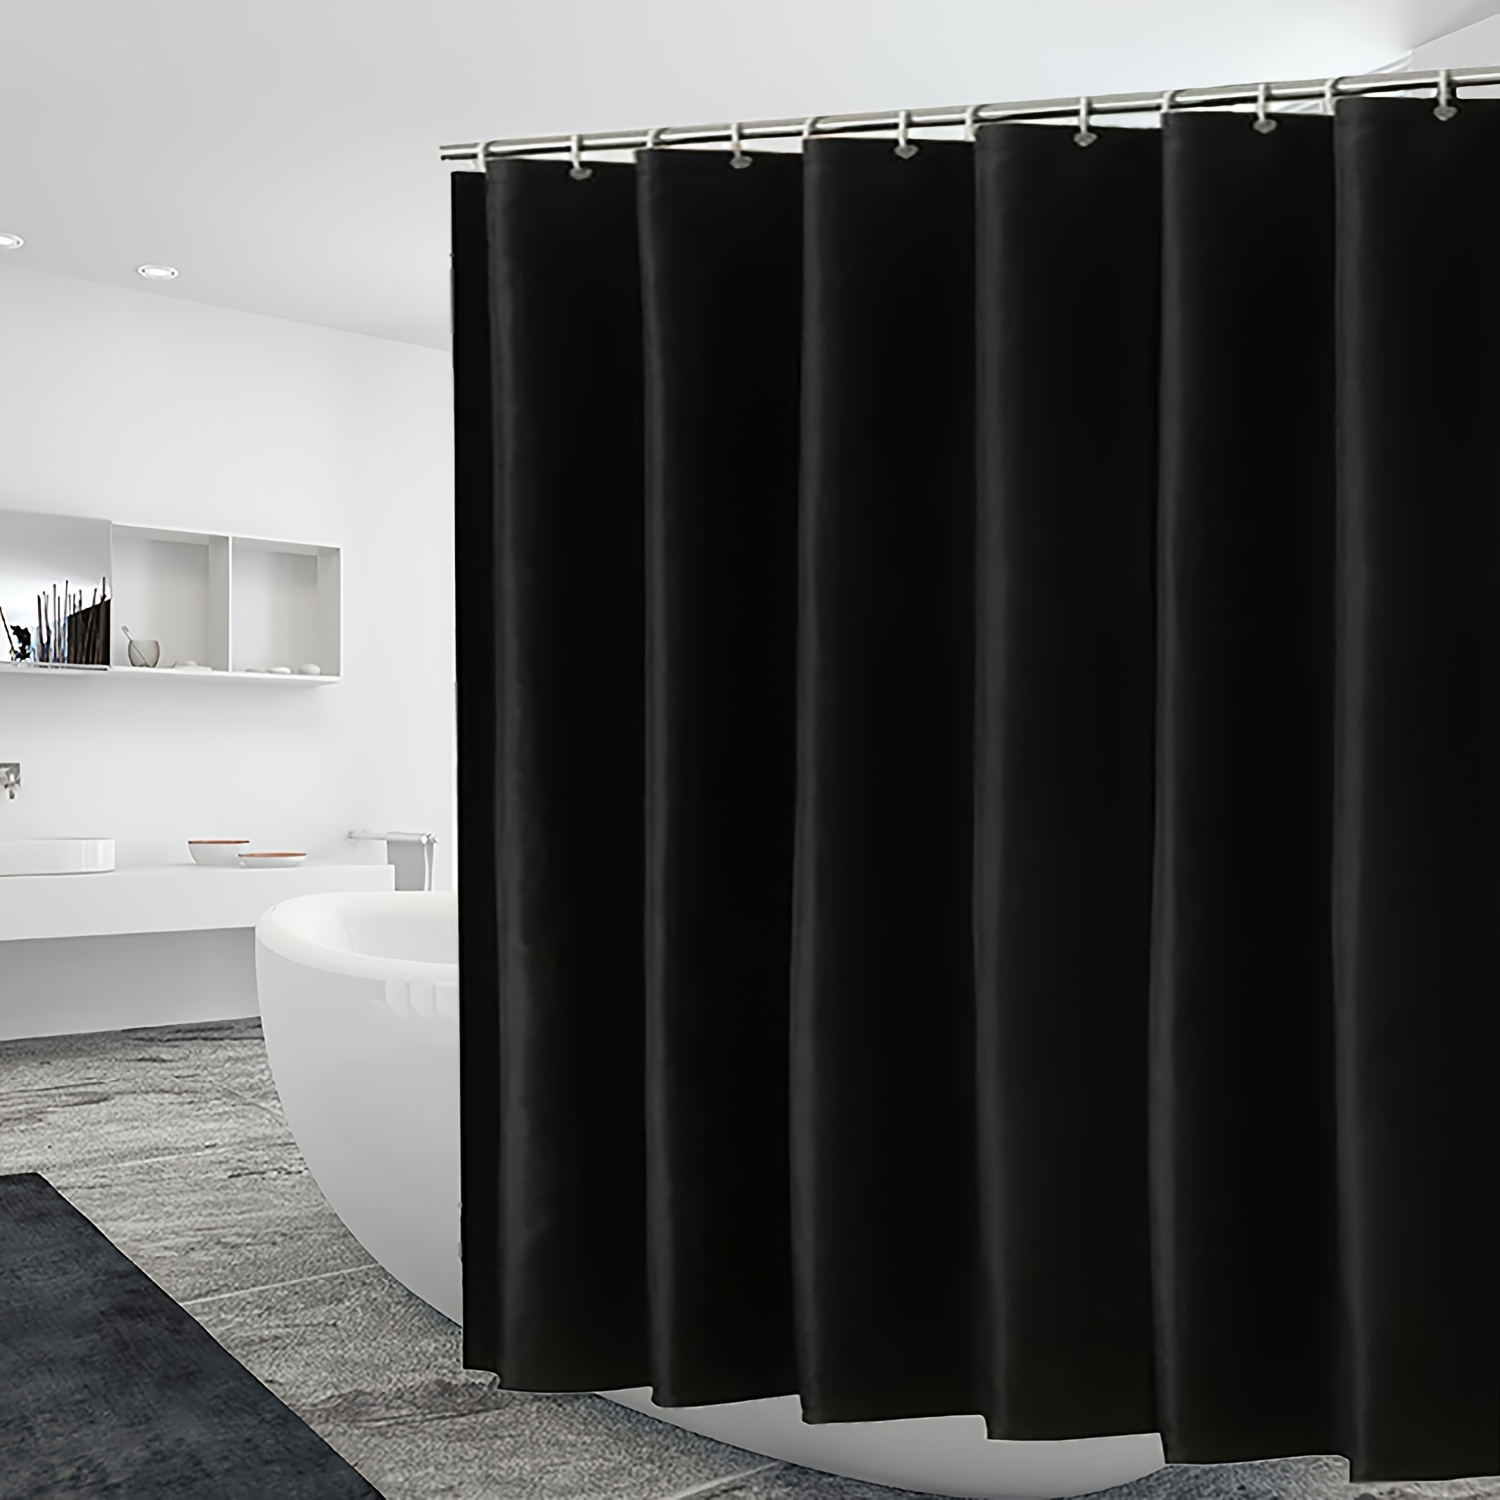 

Yusehy Shower Curtain Liner, 4g Peva Shower Curtain Liner, Plastic Peva Waterproof Shower Curtain, 36x72in/72x72in, With Loop Eyelets And 3 Magnetic Weights (black Shower Curtain)